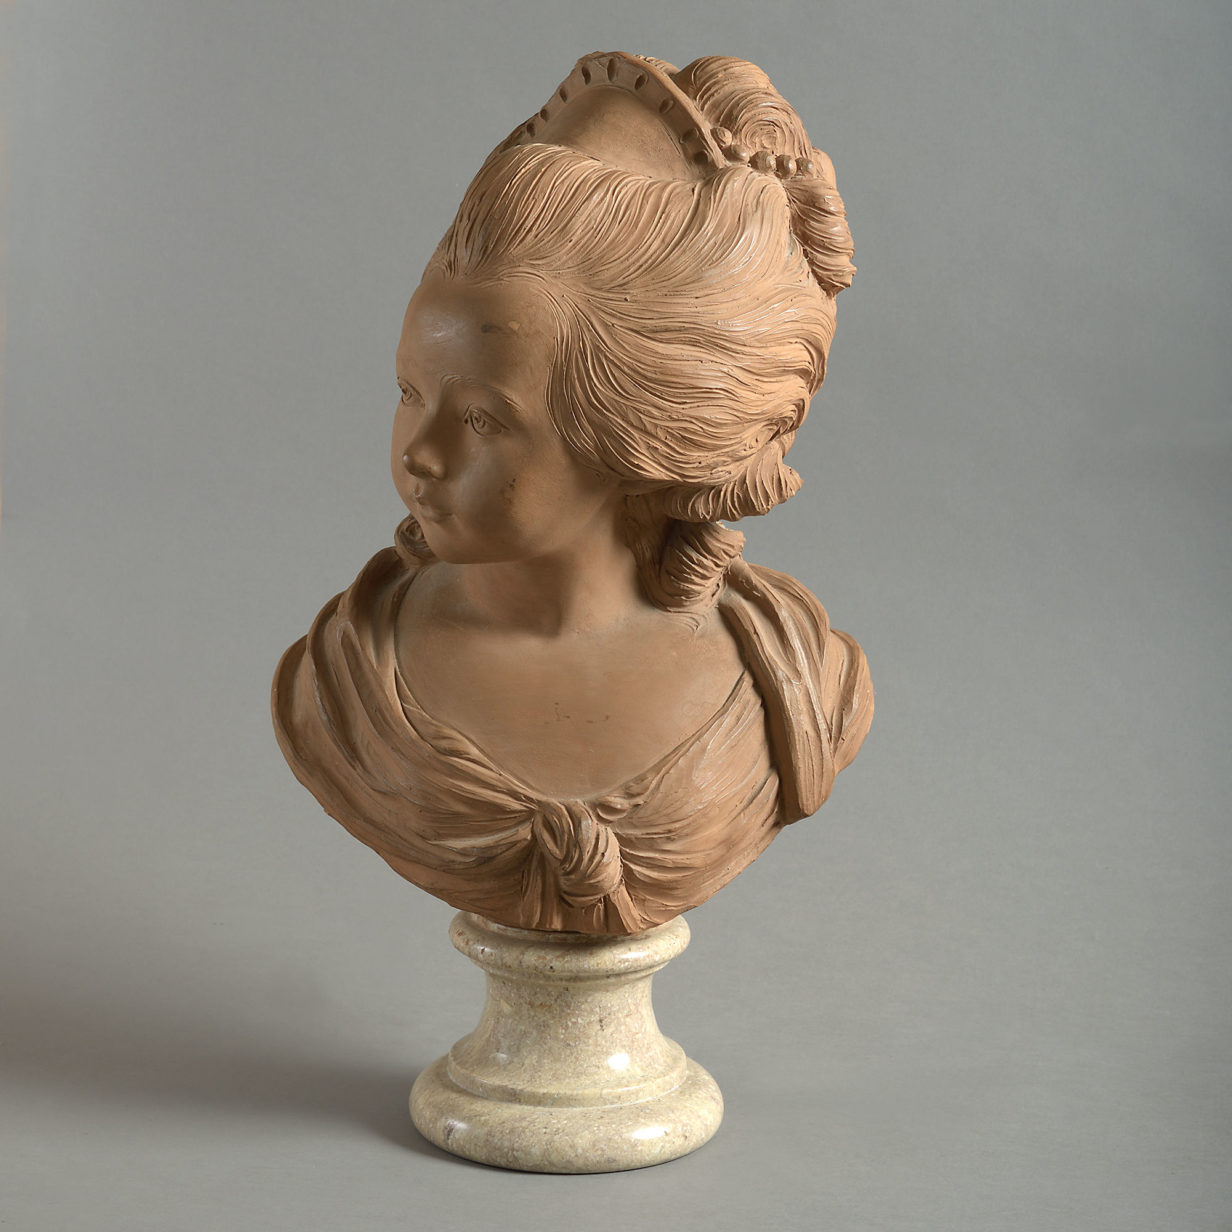 19th century terracotta bust - after houdon